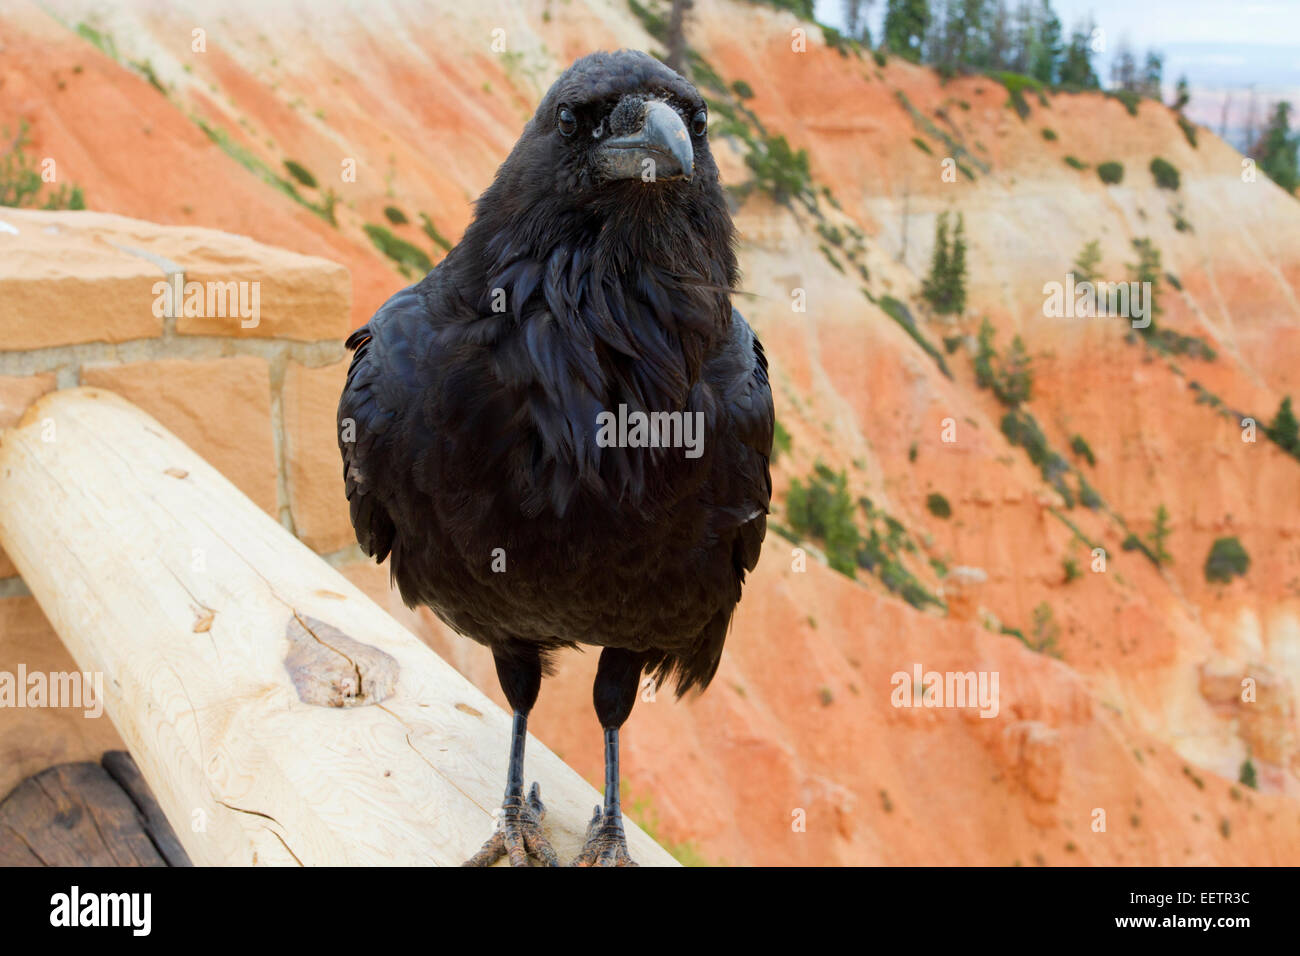 Common Raven (Corvus corax) perched on a fence overlooking Ponderosa Canyon at Bryce Canon National Park, Utah, USA in July Stock Photo